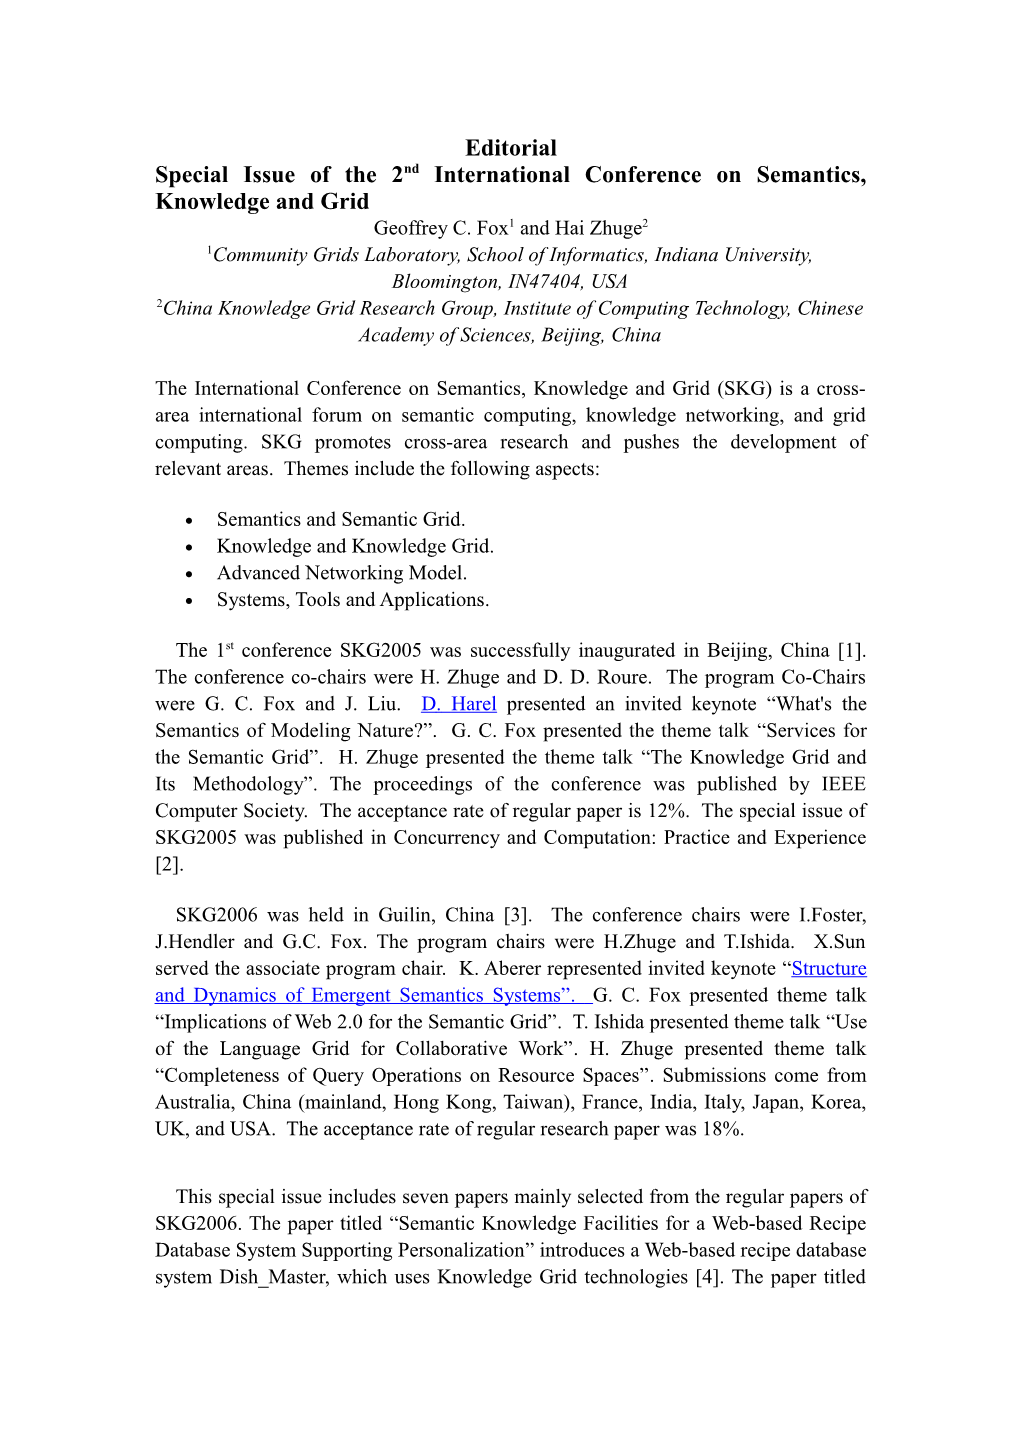 Special Issue of the 2Nd International Conference on Semantics, Knowledge and Grid